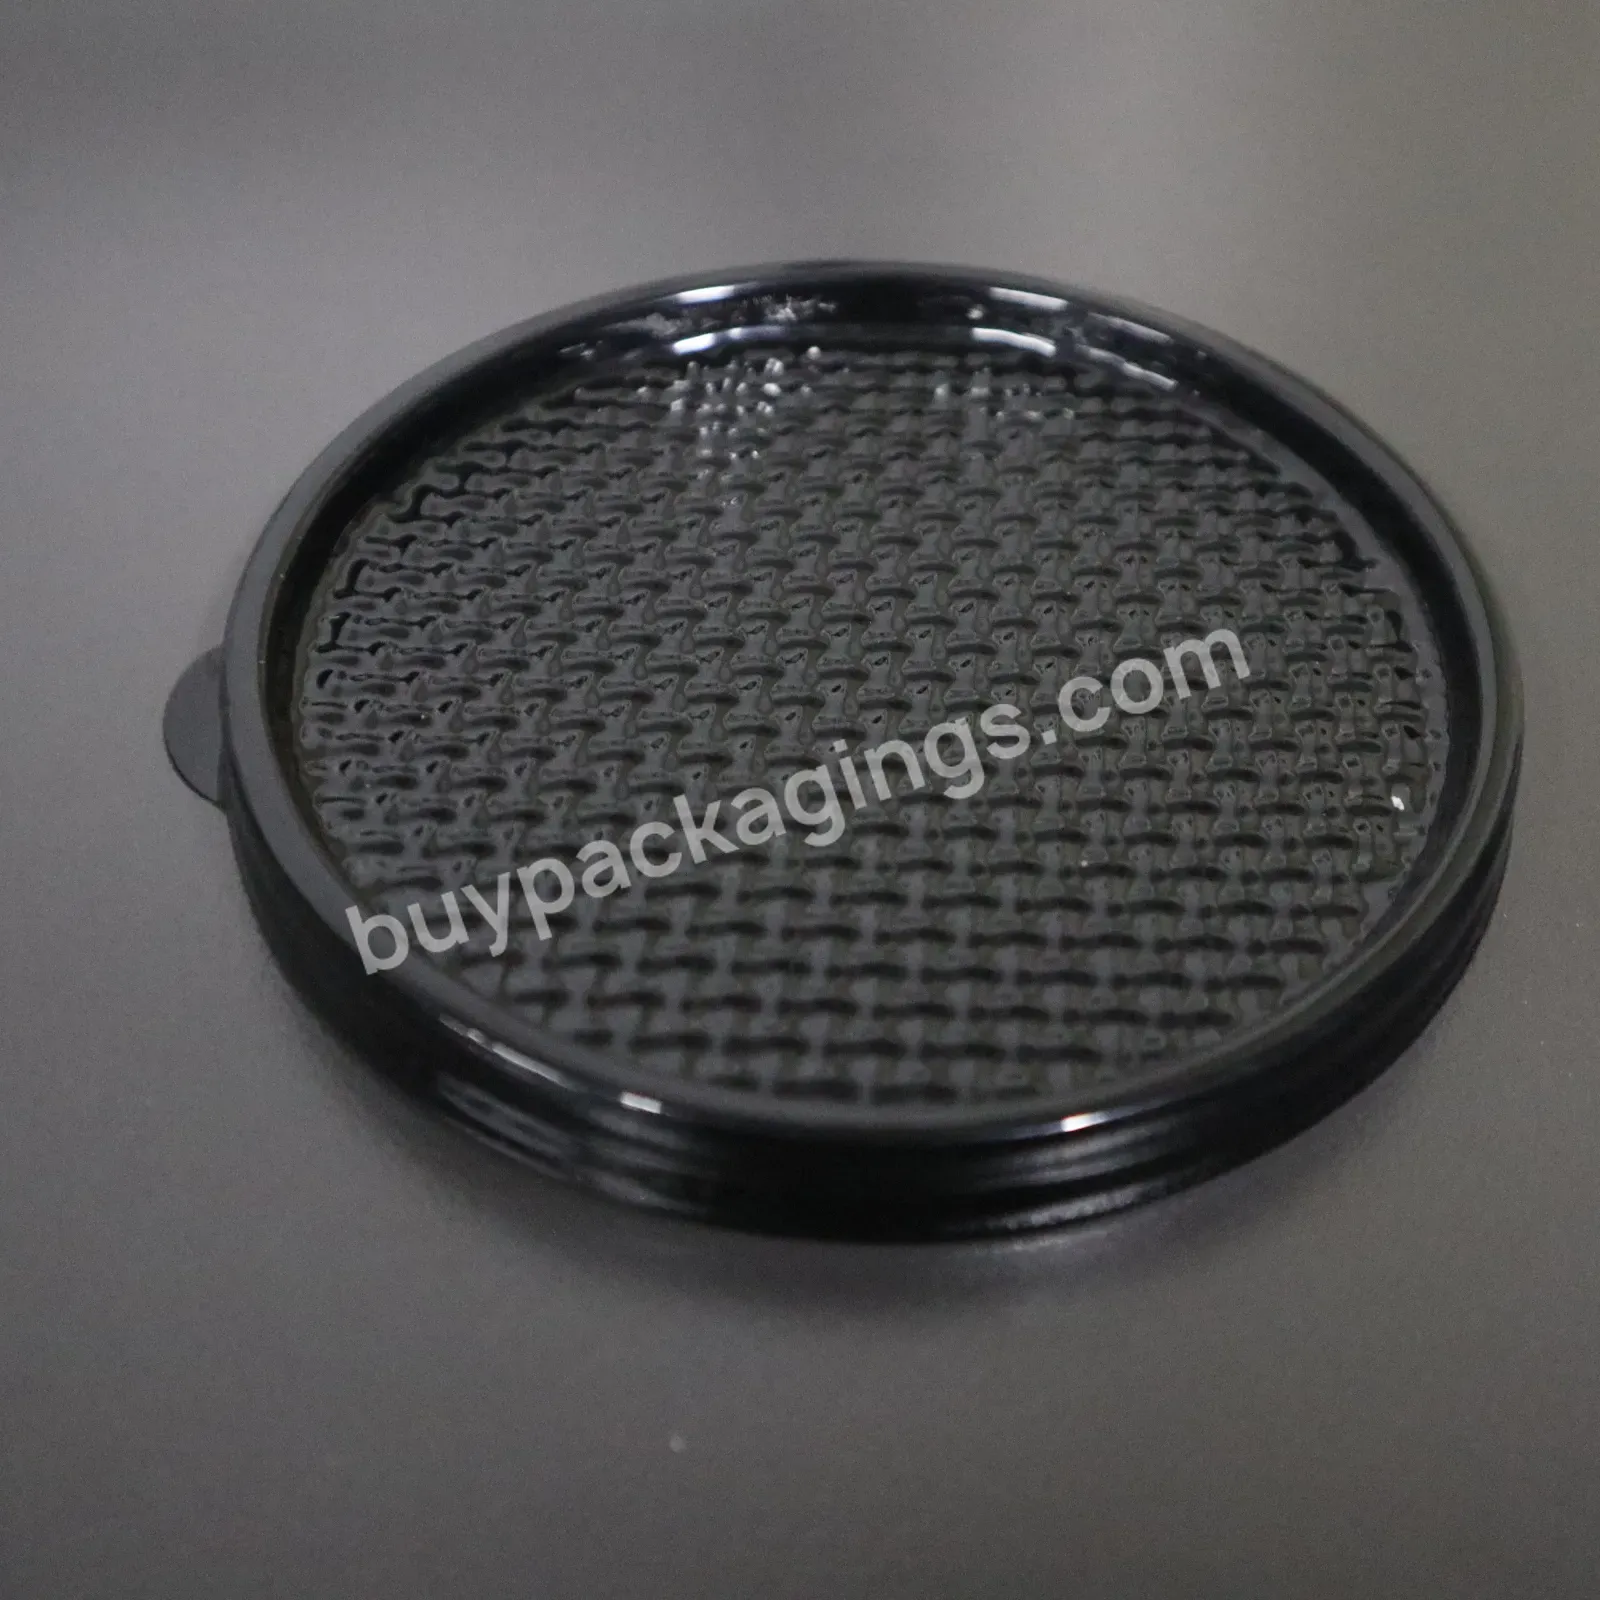 Customized Disposable Black Base Plastic Packaging Container - Buy Cake Domes Plastic Packaging With Lid,Clear Mini Pet Cake Boxes,Customized Cake Box Packaging.